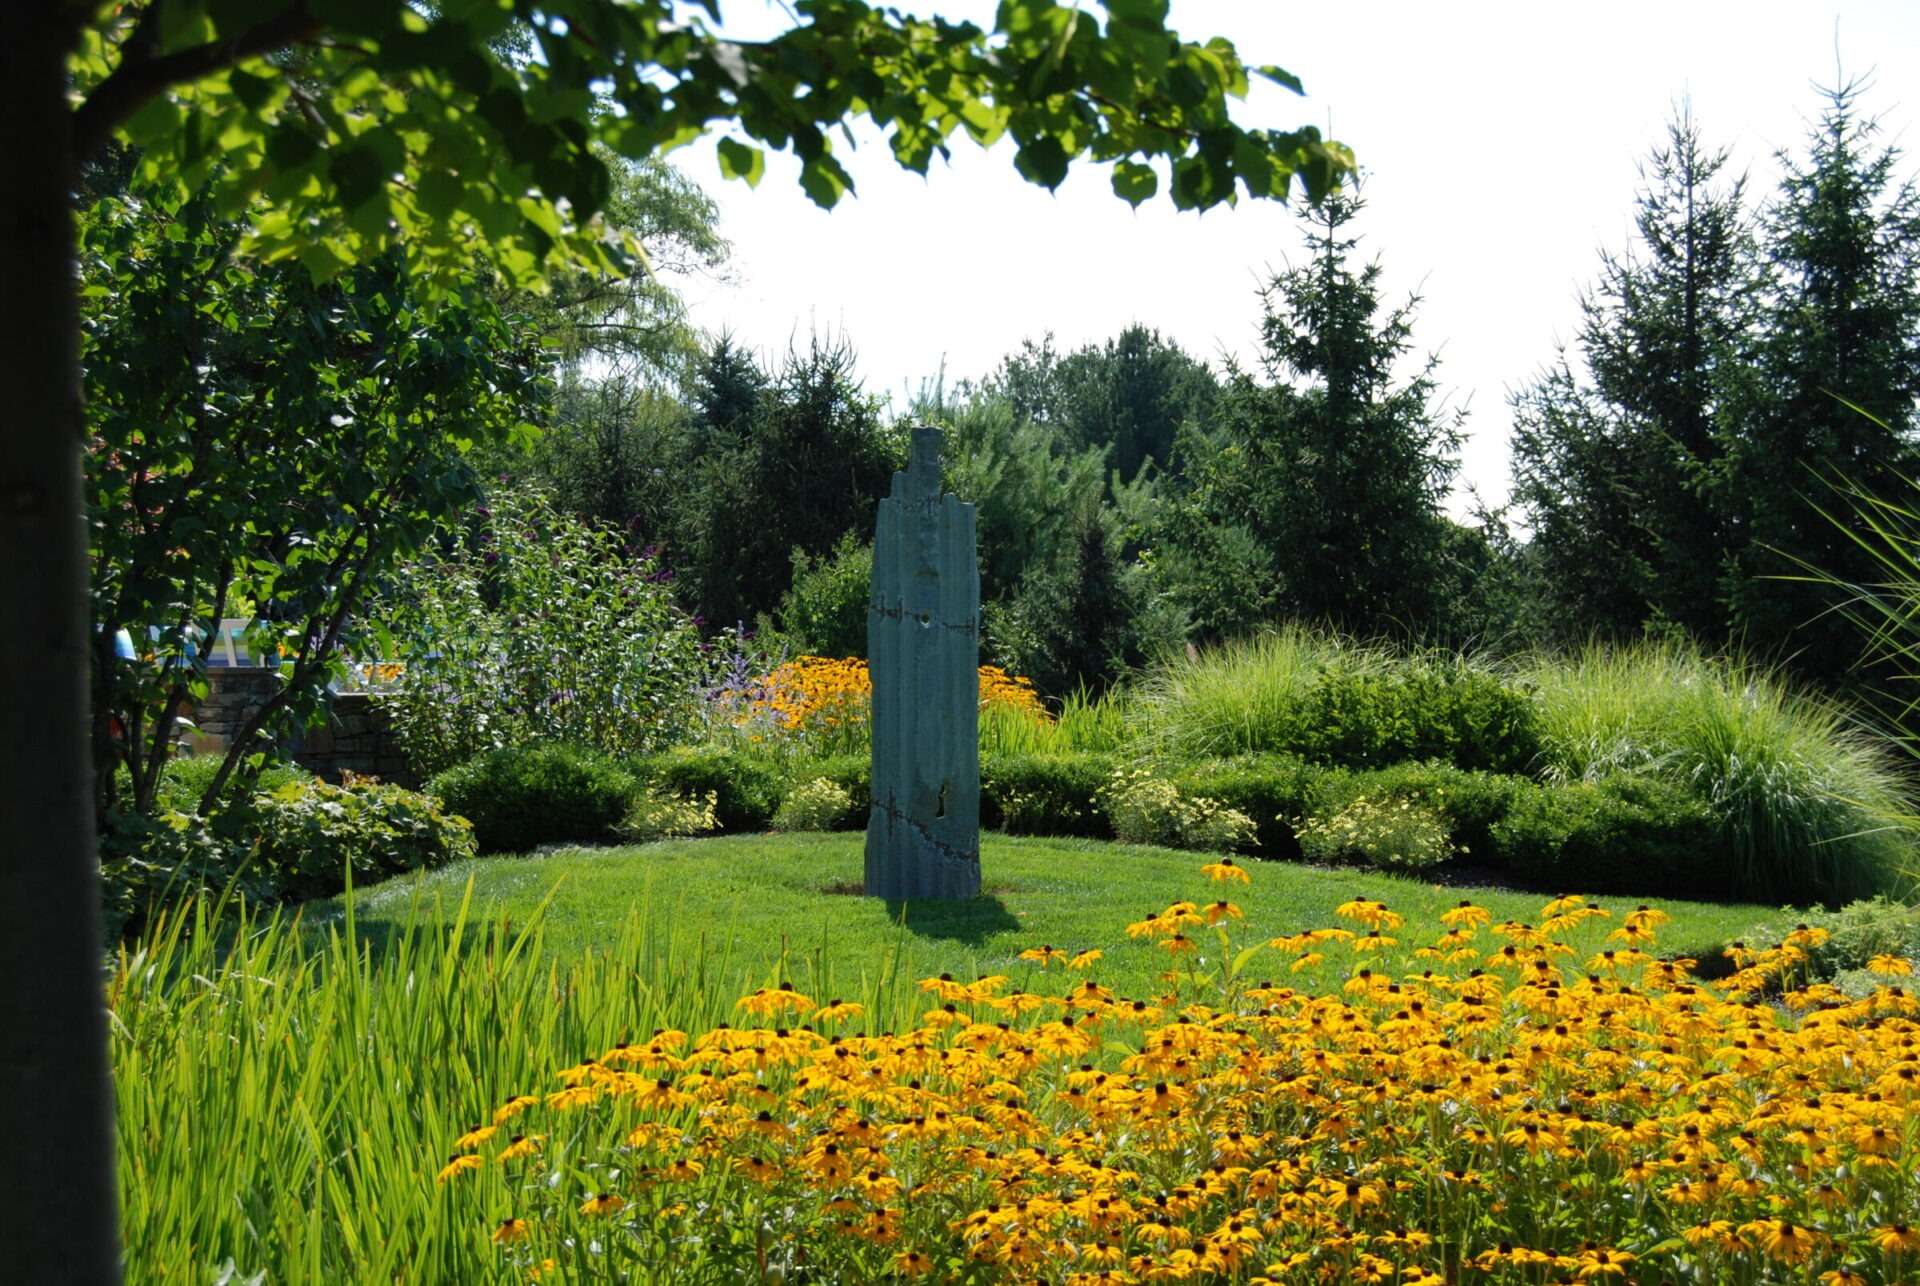 This image shows a vibrant garden with blooming yellow flowers, ornamental grass, green shrubs, and trees under a clear blue sky. An artistic sculpture stands centrally.